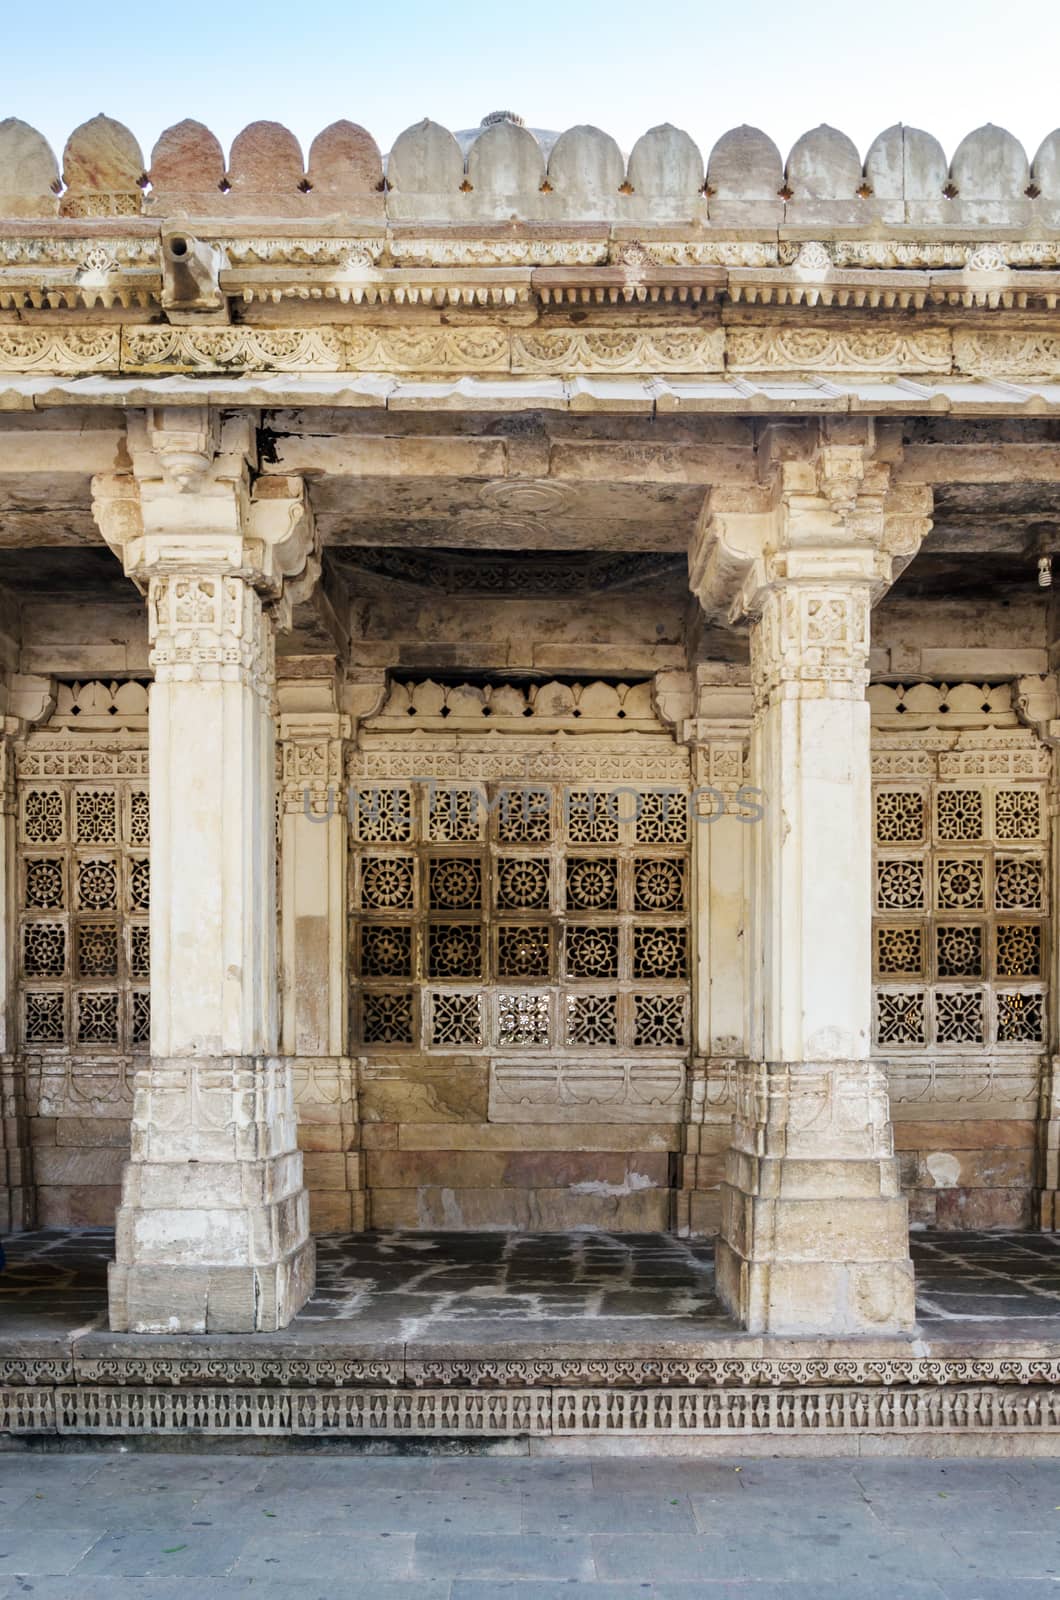 Carved stone grilles on the walls of the Tomb of Sufi Saint Shaikh Ahmed Khattu at Sarkhej Roza in Ahmedabad, India